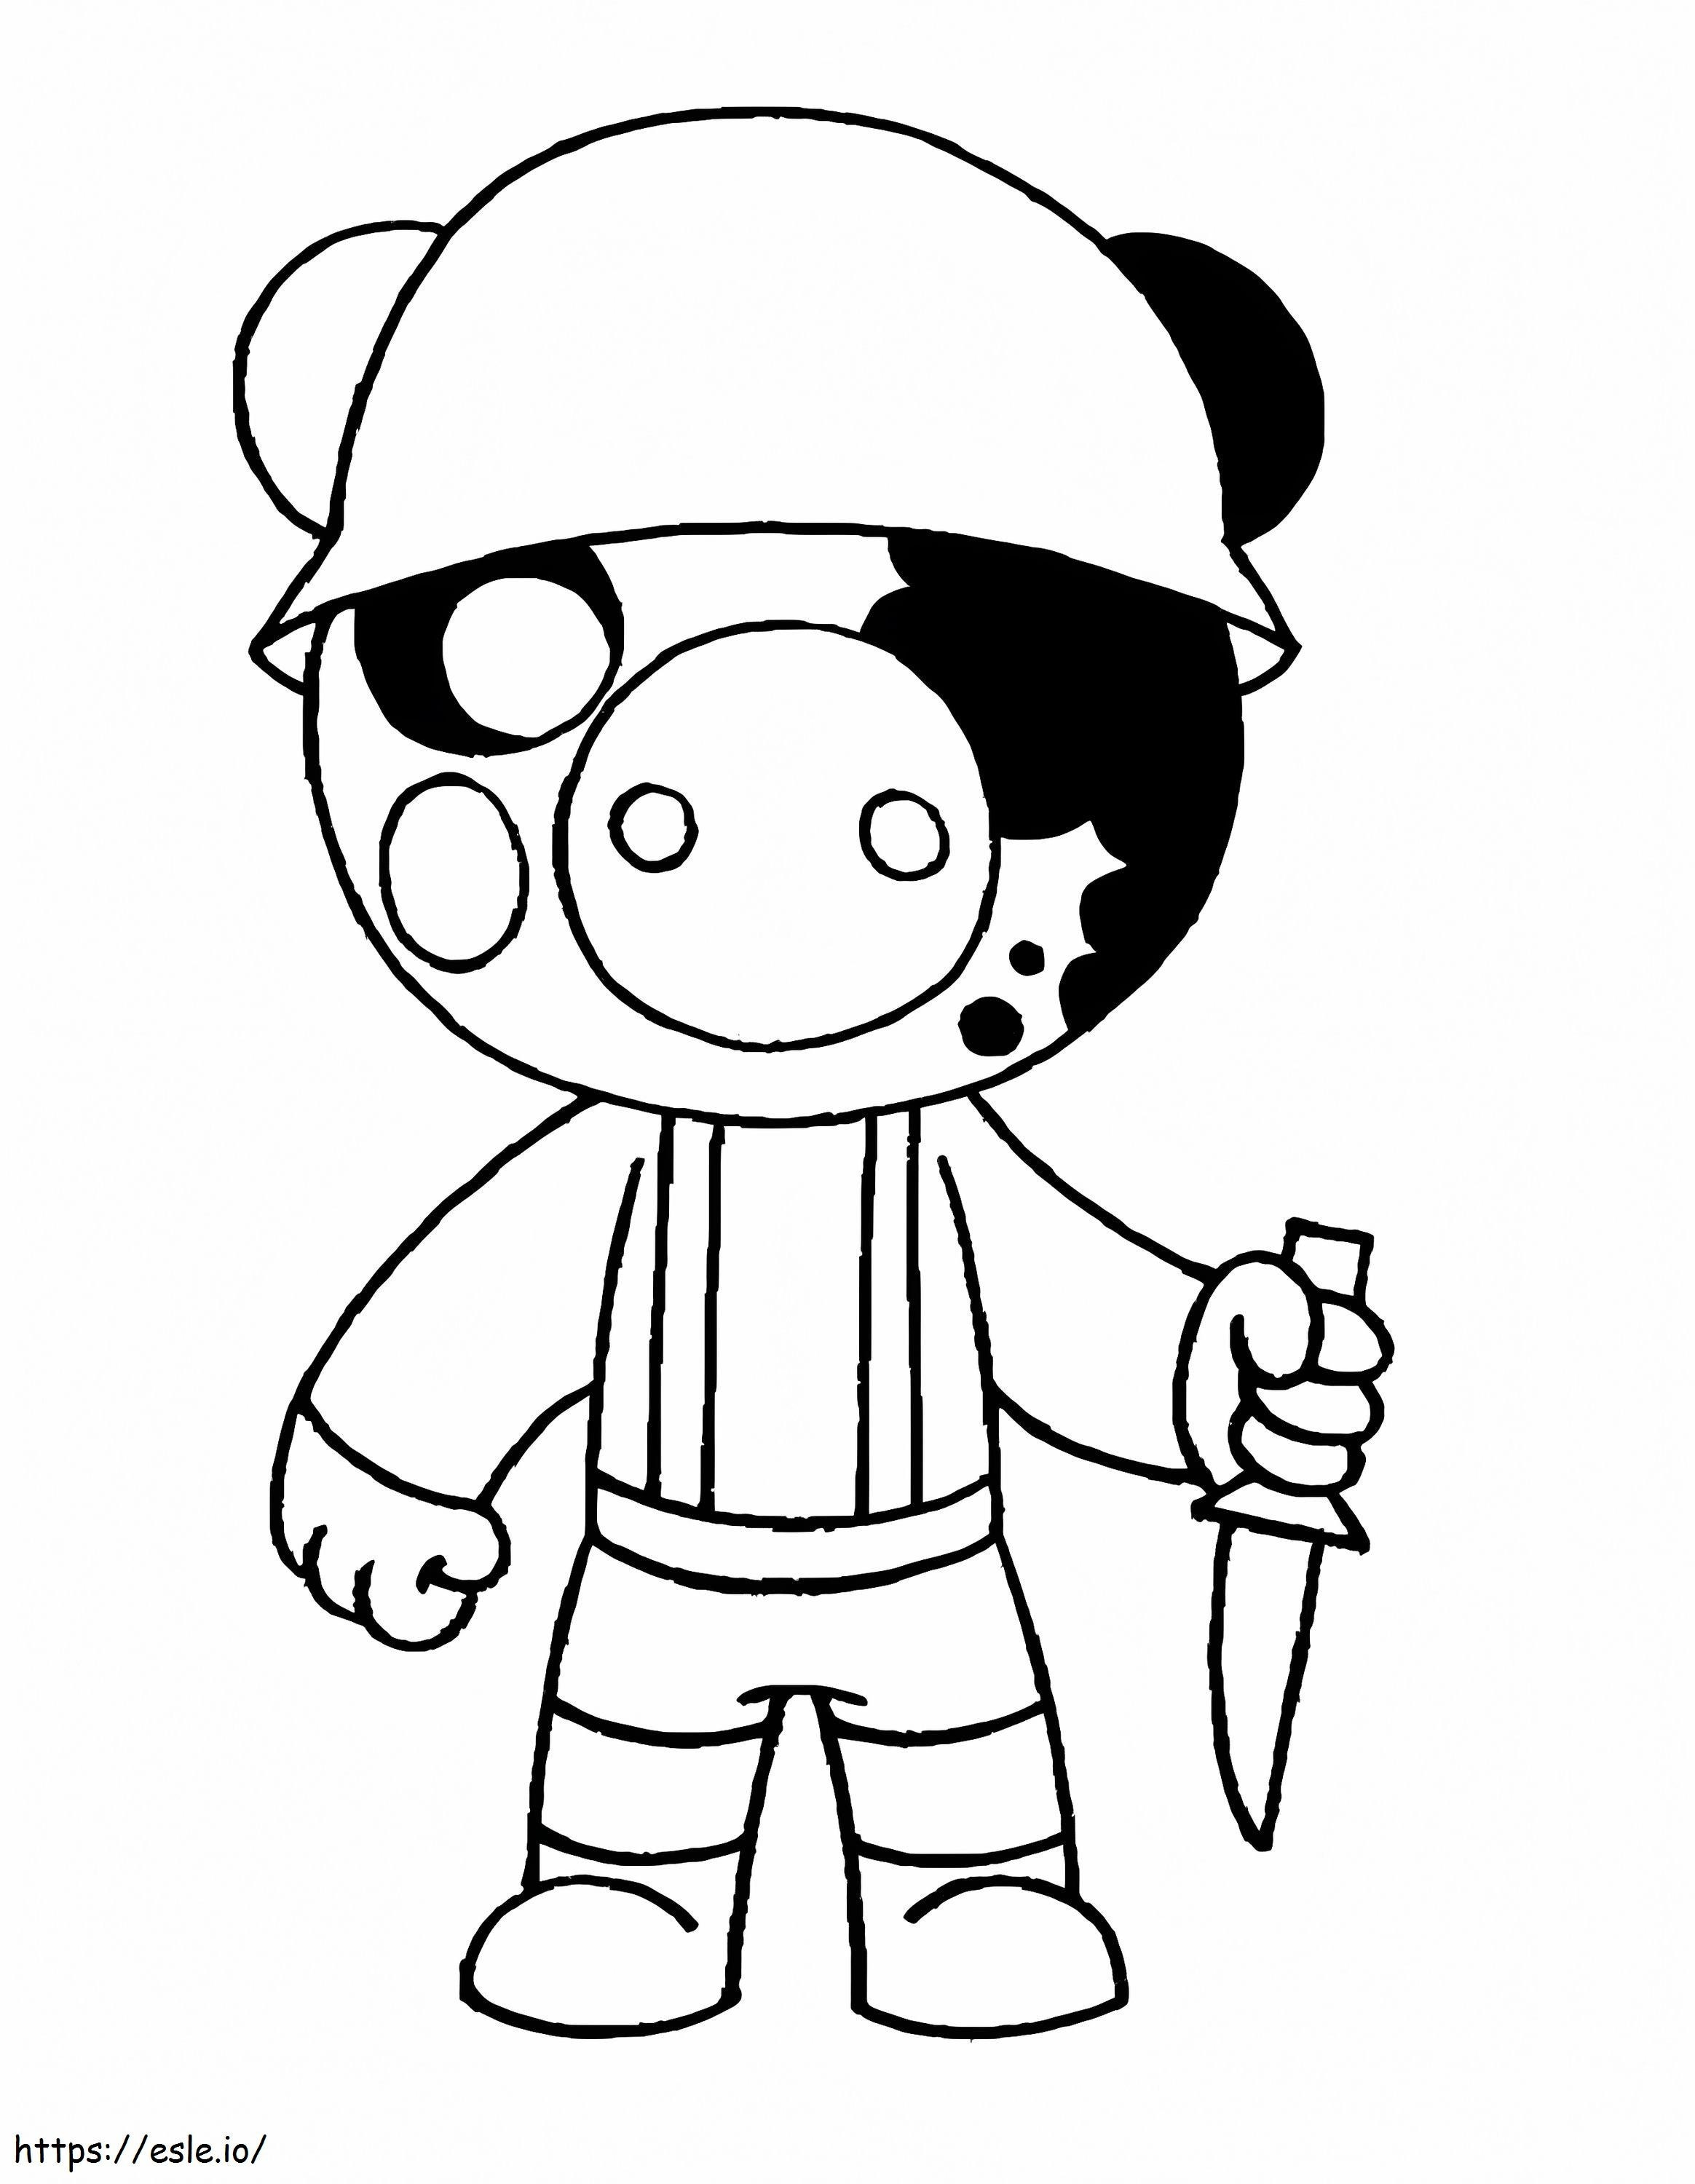 Soldier Piggy Roblox coloring page